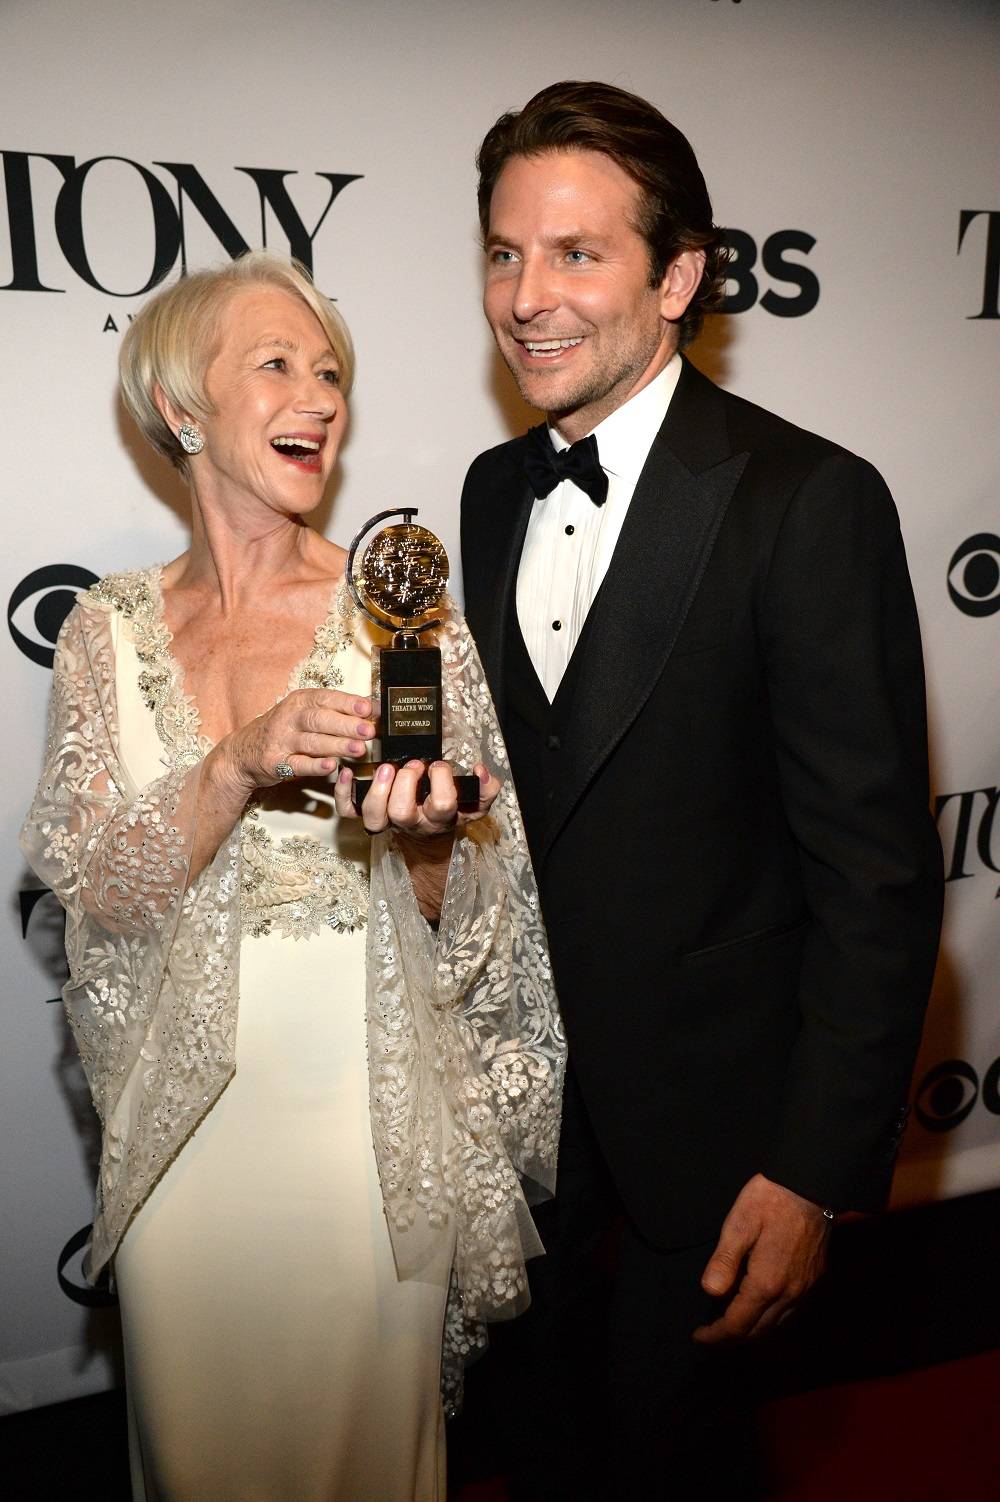 NEW YORK, NY - JUNE 07:  Helen Mirren and Bradley Cooper attend the 2015 Tony Awards at Radio City Music Hall on June 7, 2015 in New York City.  (Photo by Kevin Mazur/Getty Images for Tony Awards Productions)